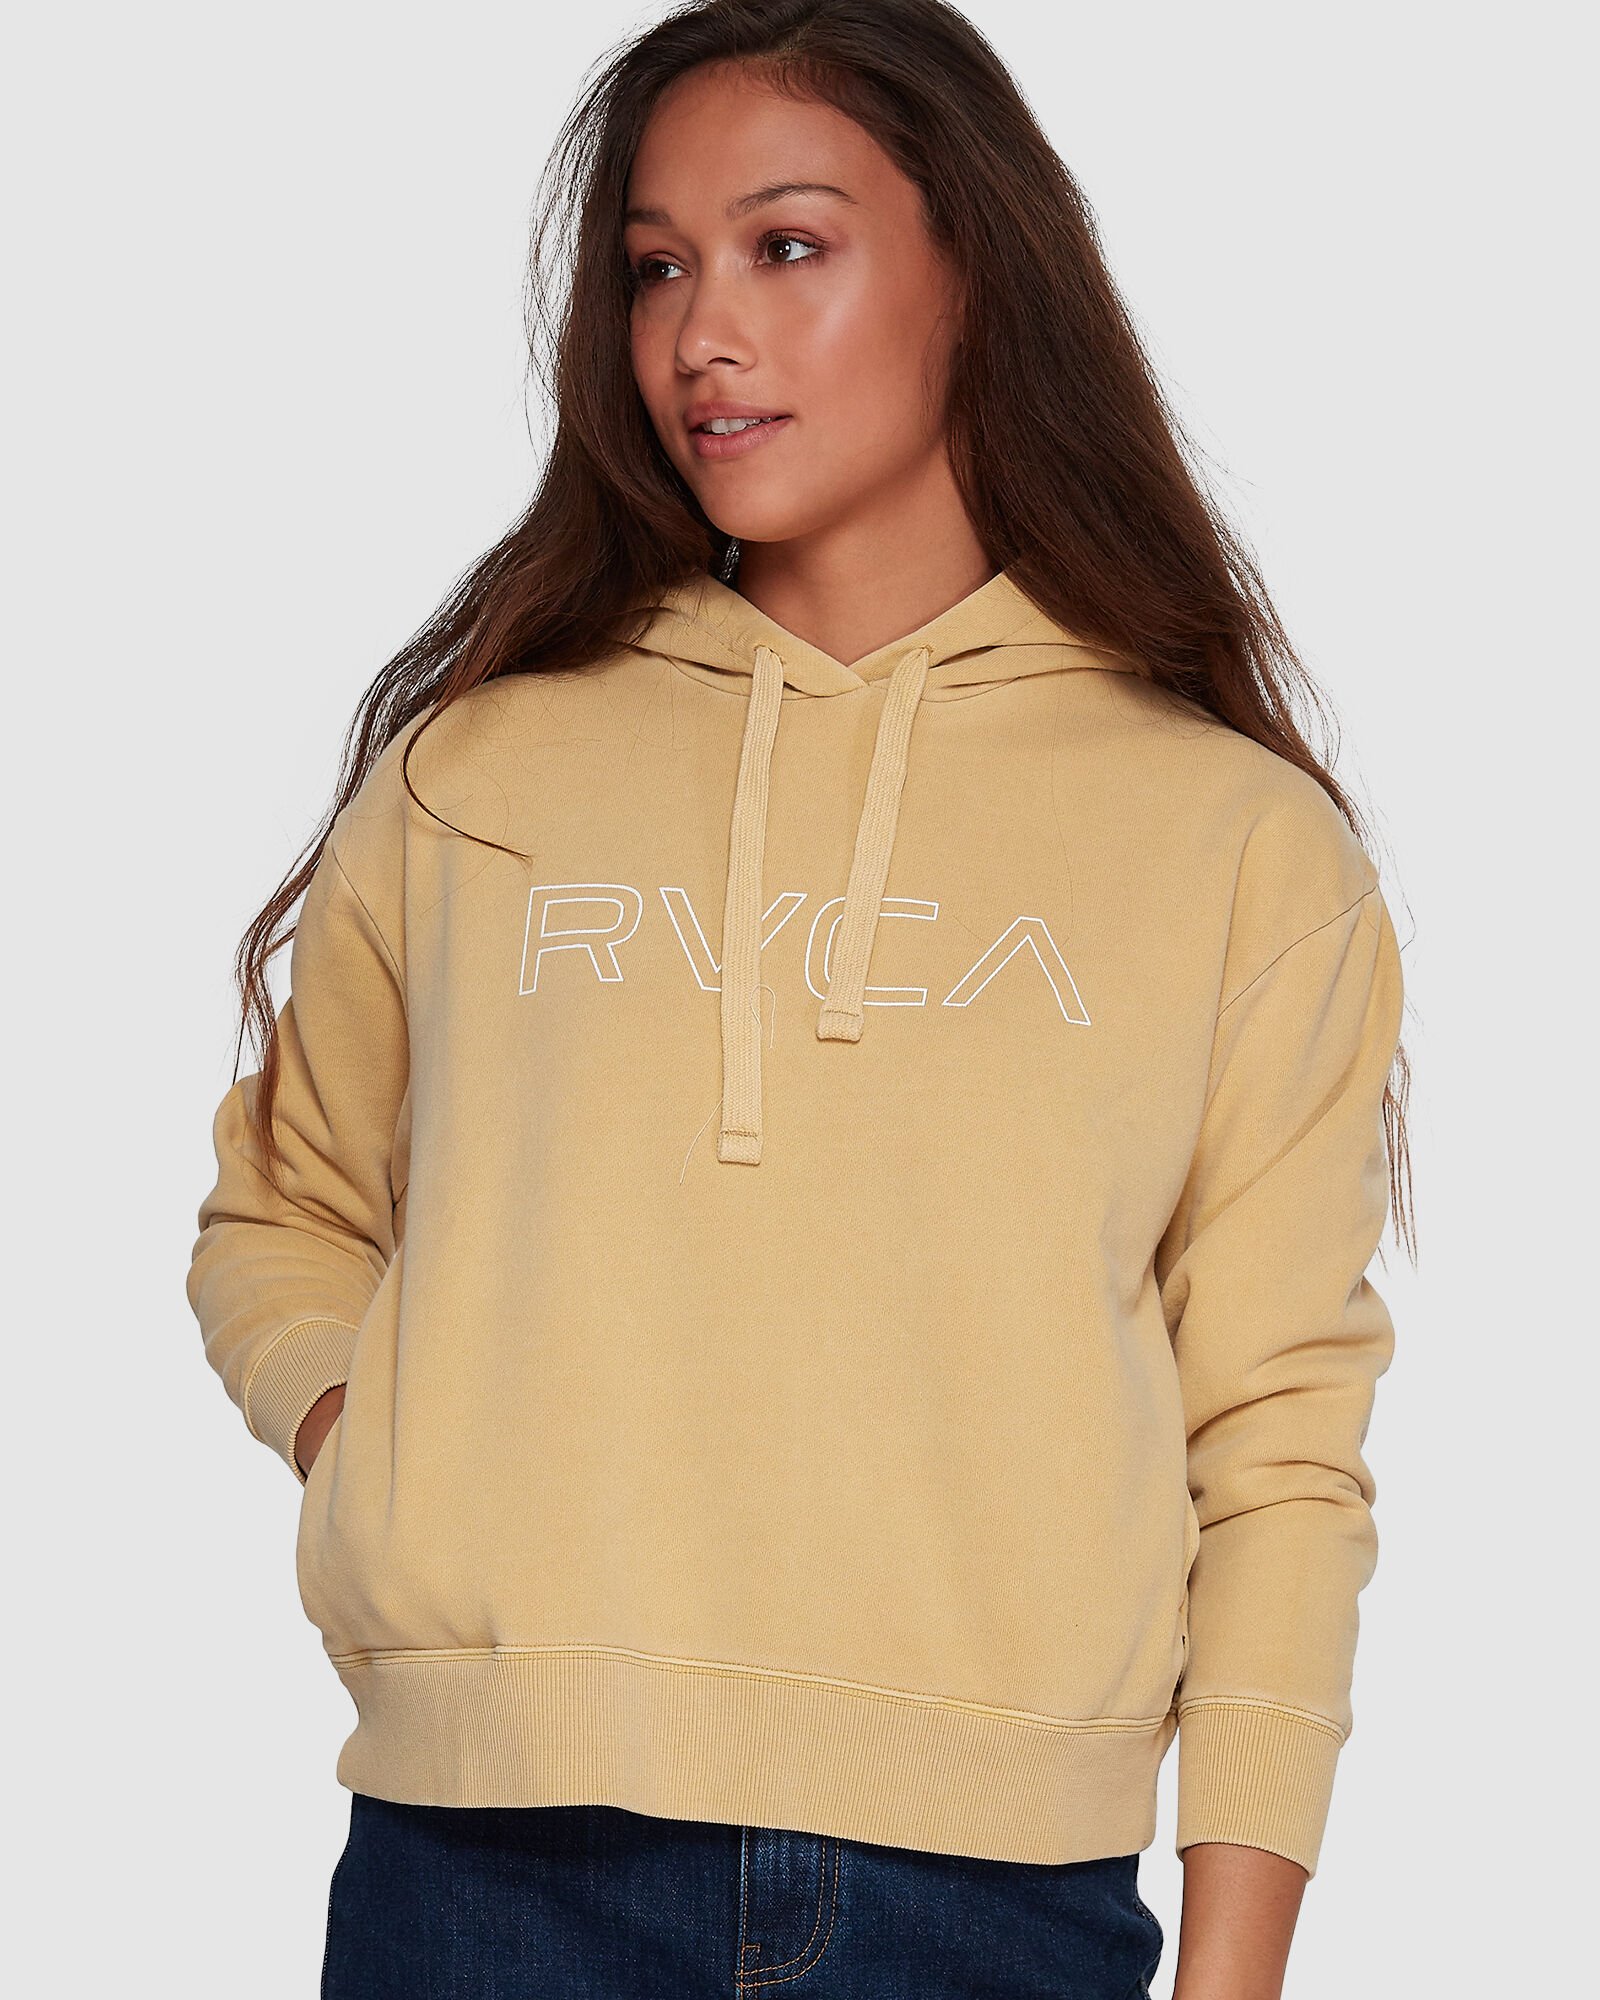 RVCA - Keyline Vintage Pigment Hood - Womens-Tops : We stock the very ...